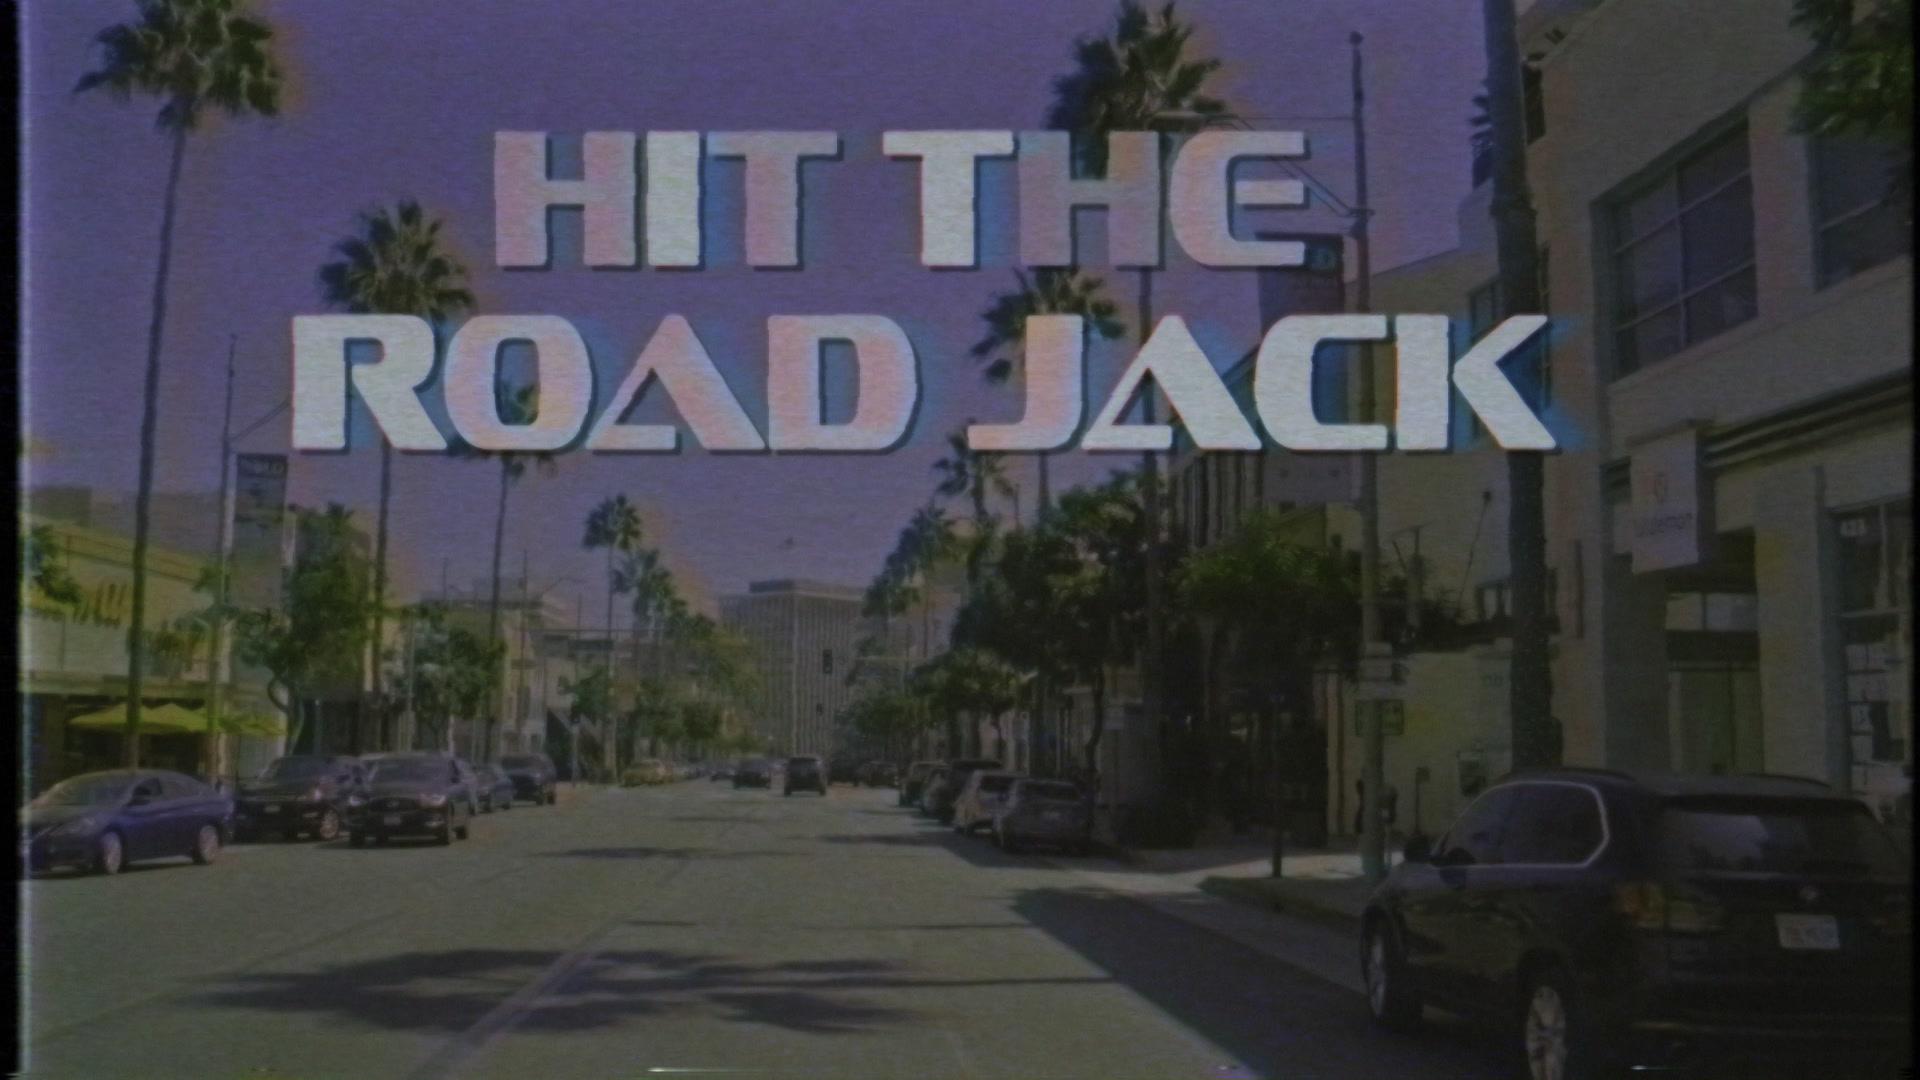 AFTR SUN - HIT THE ROAD JACK (Official Video)